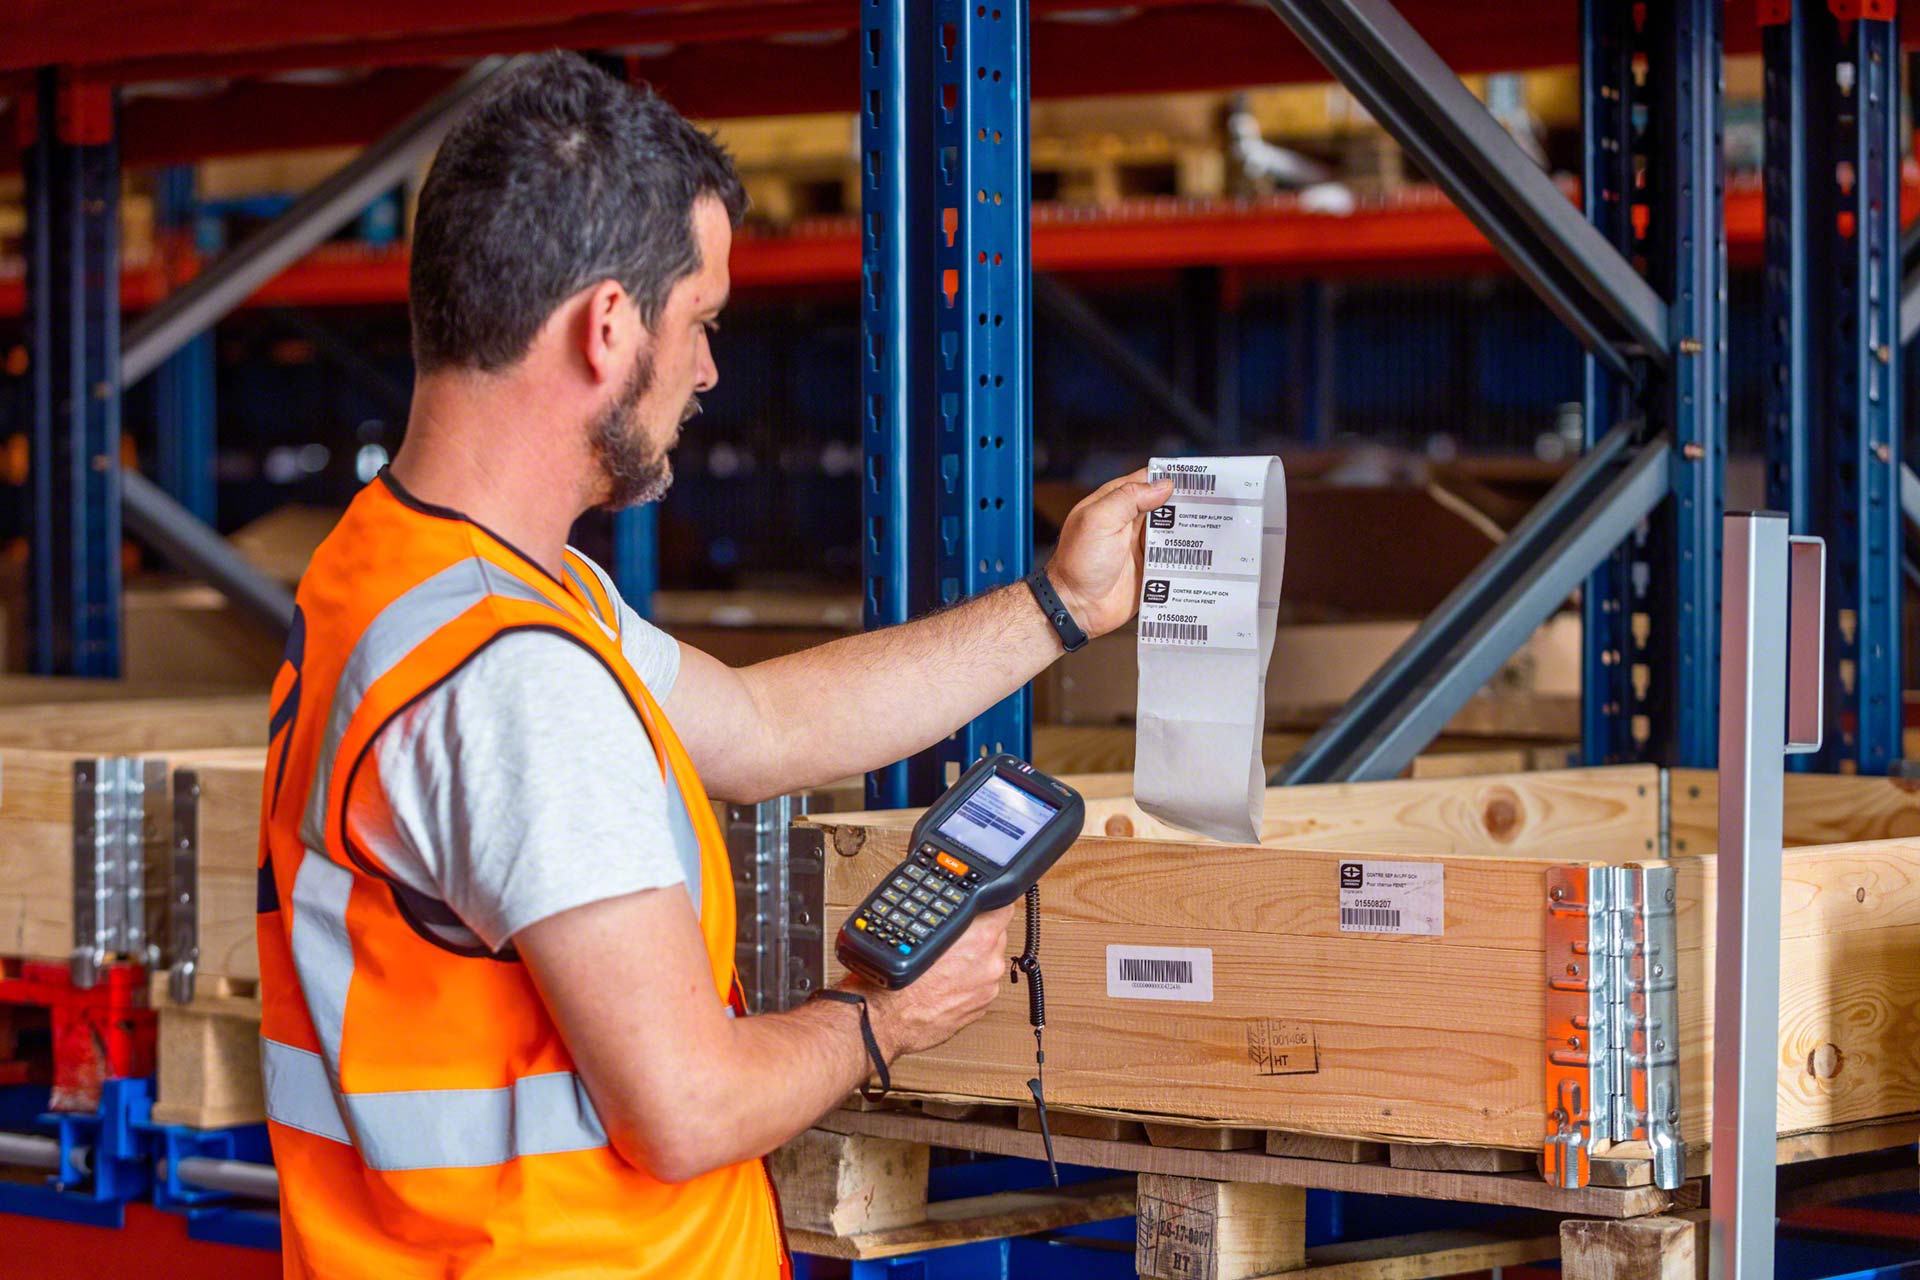 Physical inventory is the operation consisting of manually counting all stock in the warehouse